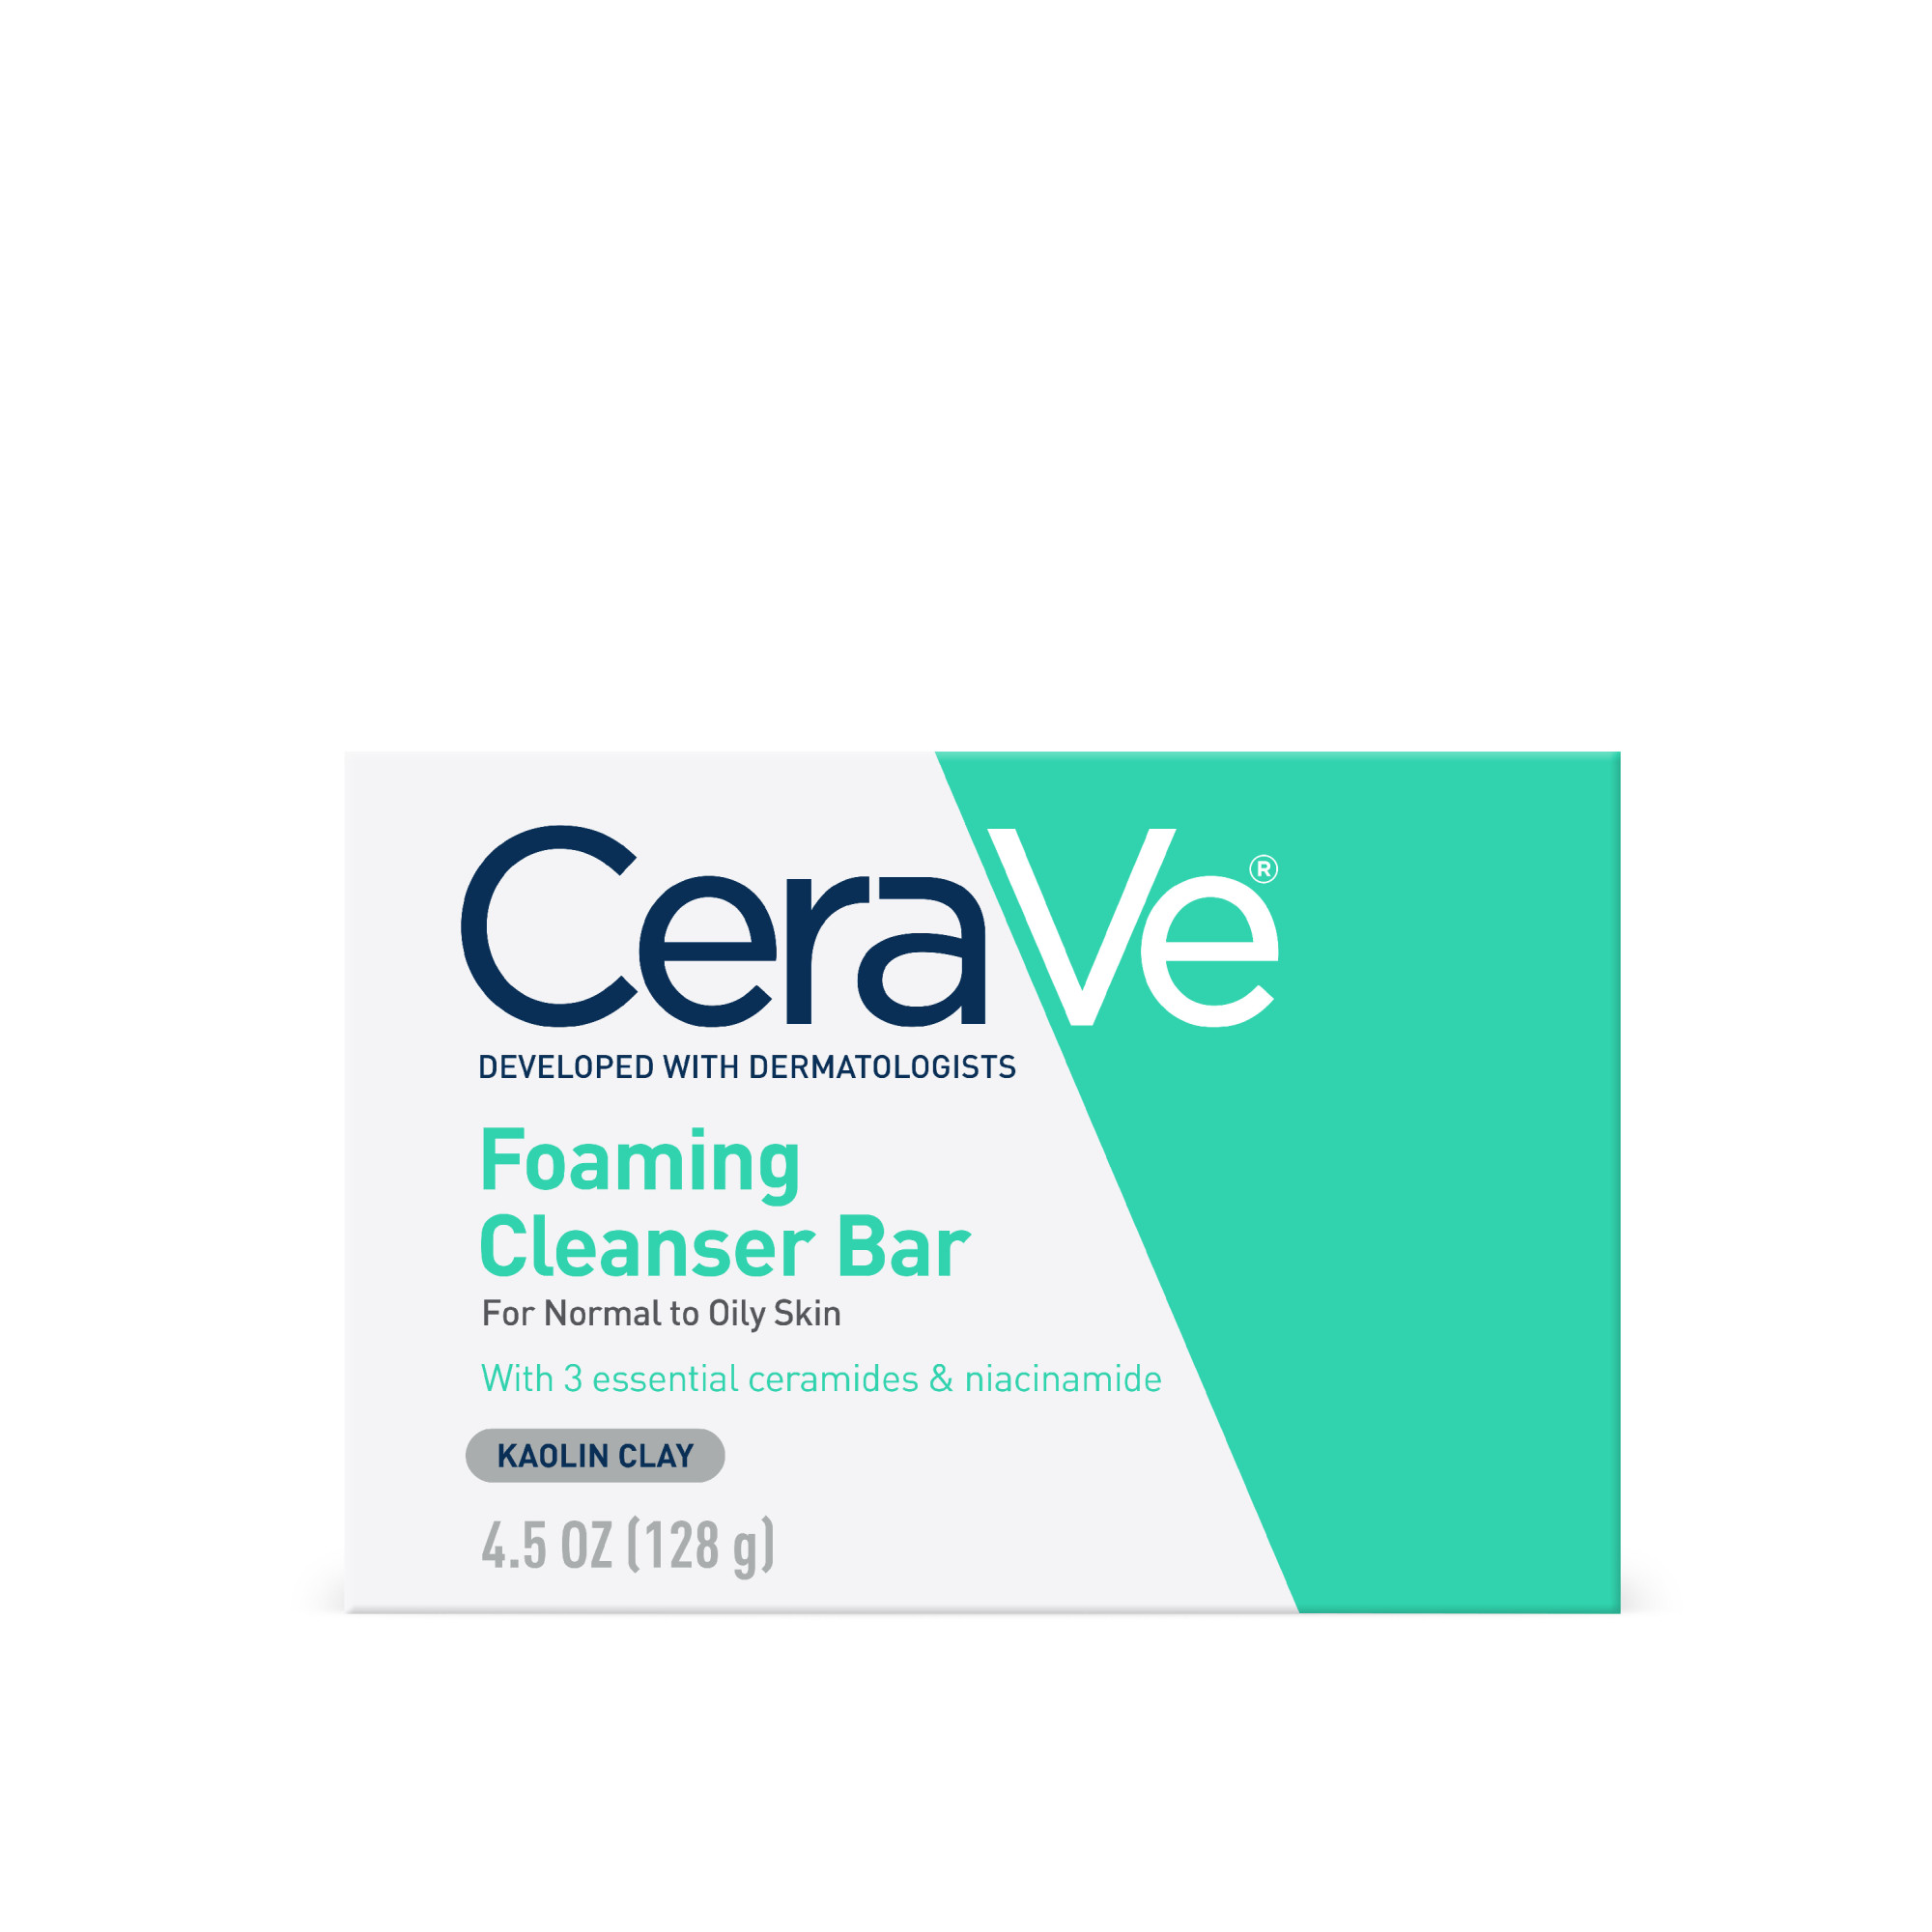 CeraVe Foaming Cleansing Bar, Kaolin Clay - 4.5 oz - image 1 of 7